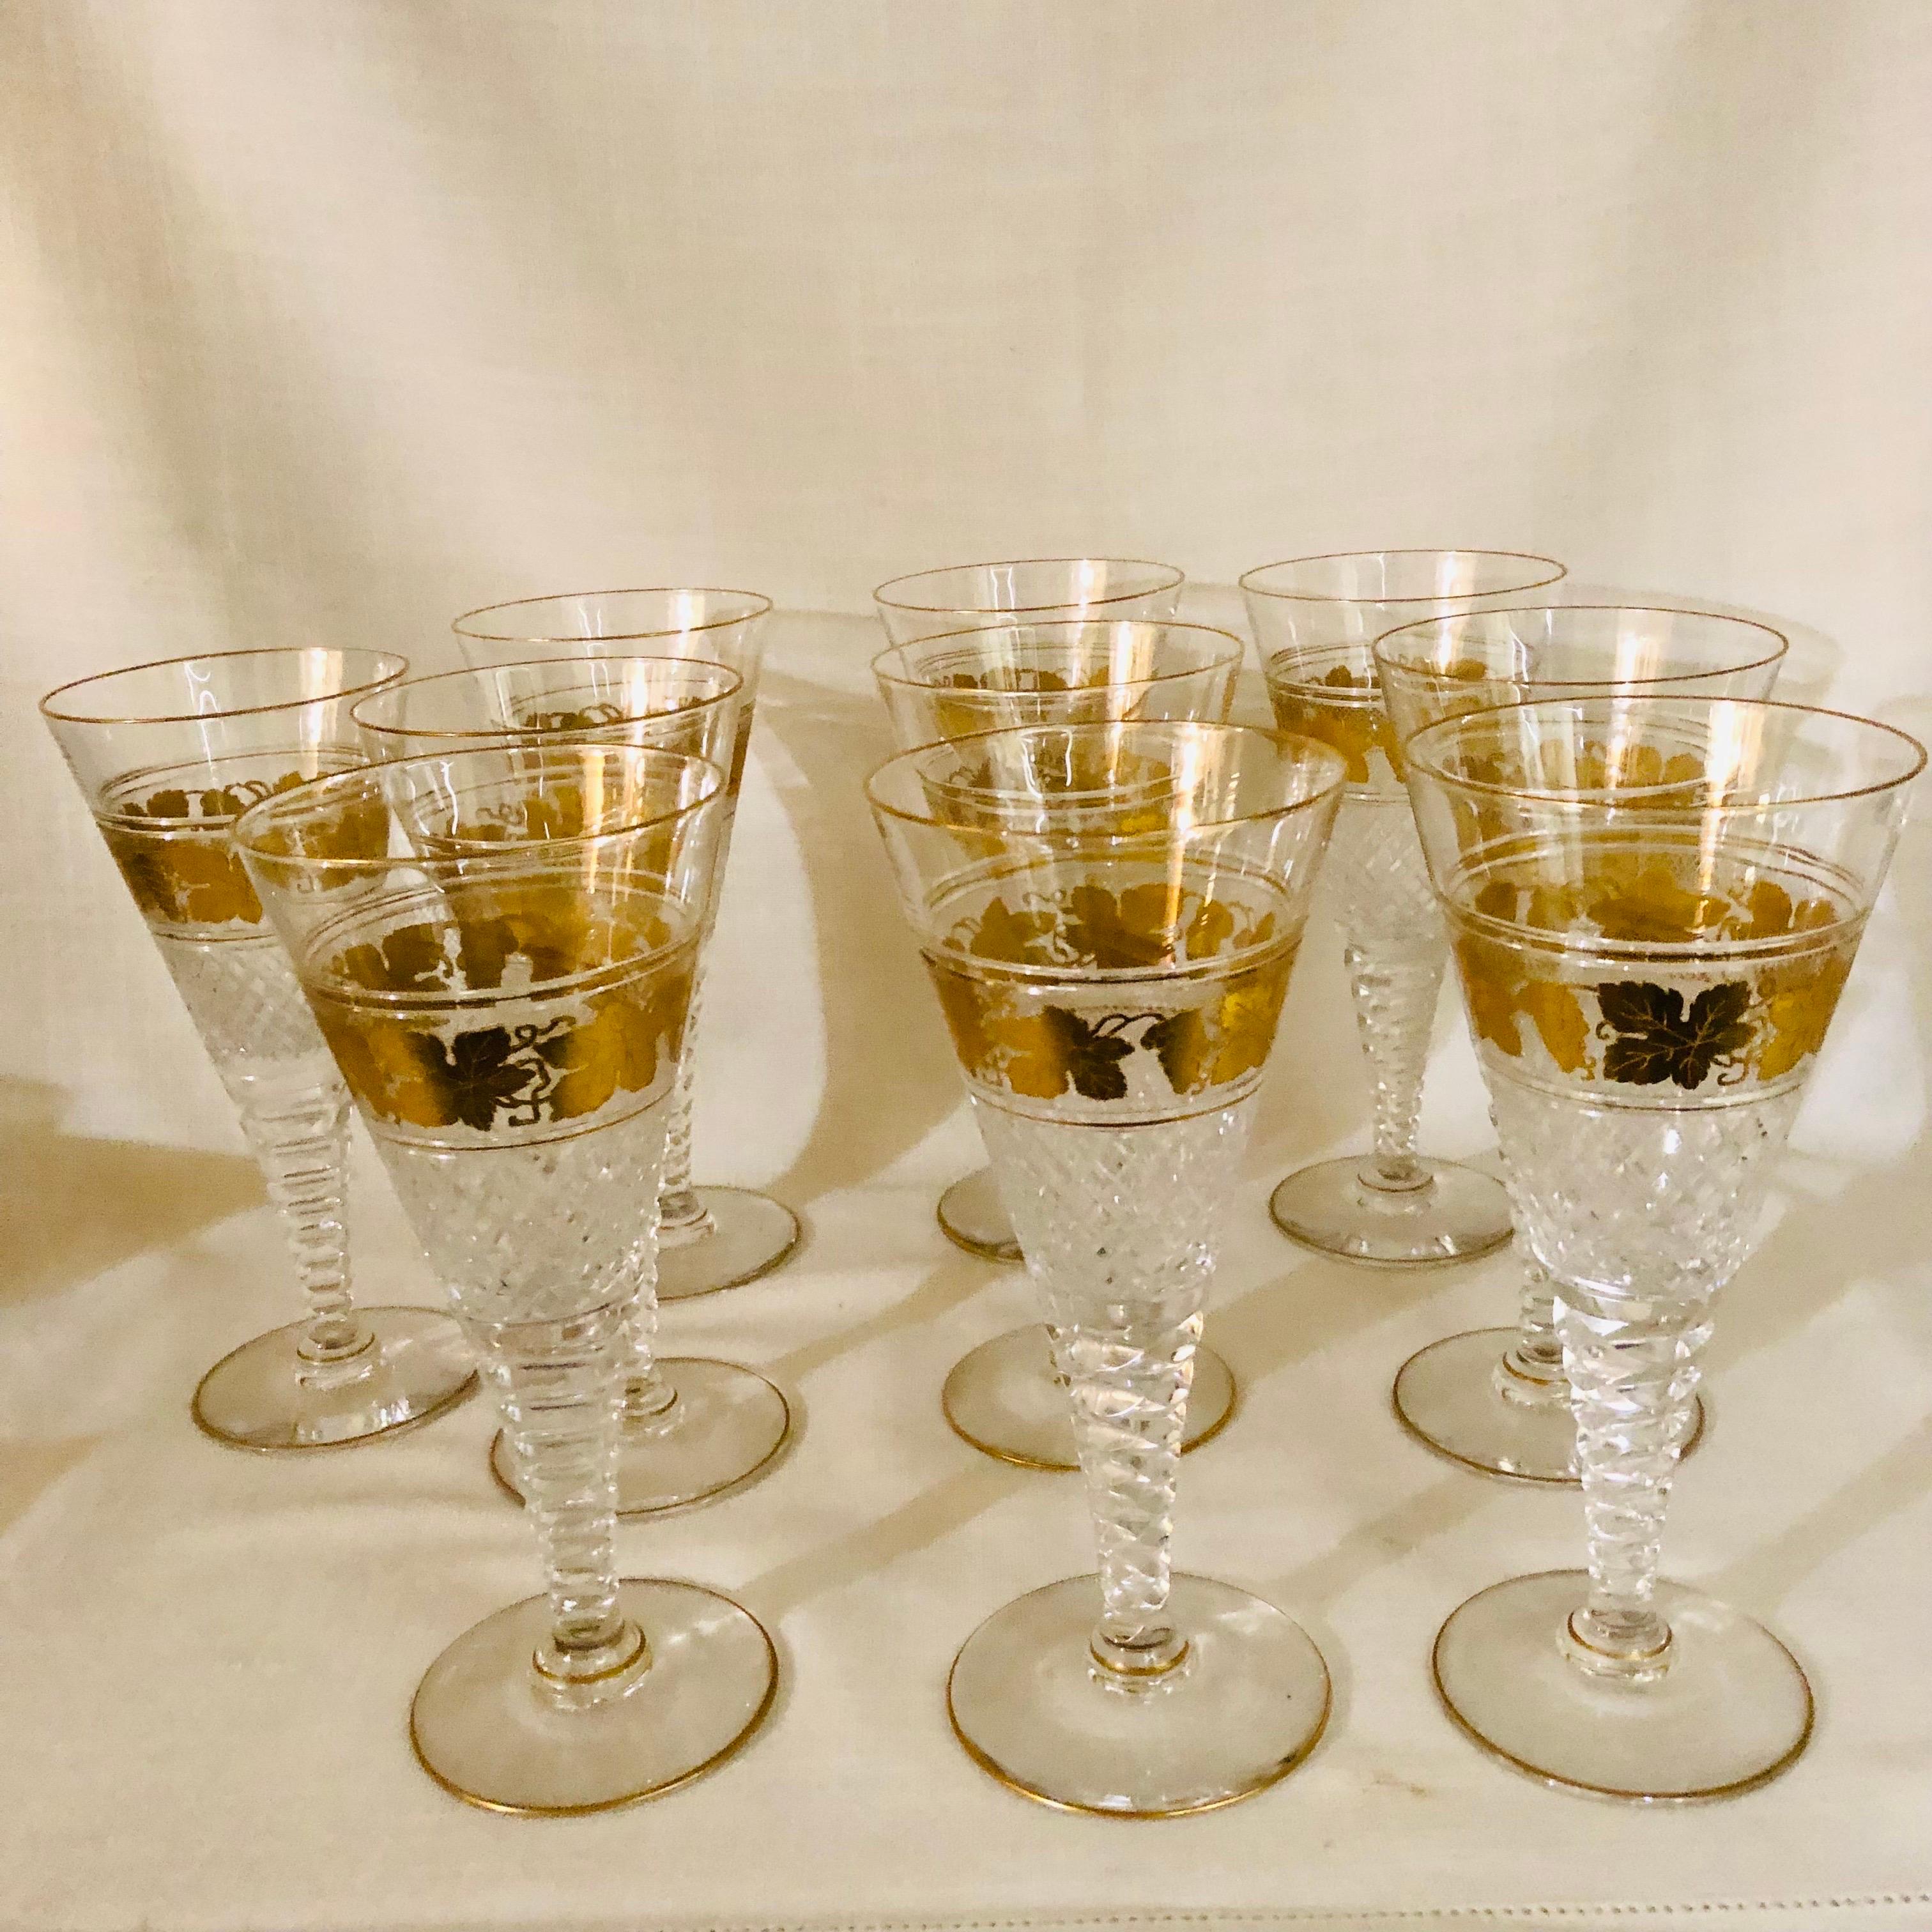 This is a gorgeous set of ten Val St. Lambert Belgium cut crystal goblets decorated with gilded grape leaves and grapes. The bases or stems of the goblets are beautifully cut as you can see in the pictures and the video. Each goblet is 10.25 inches